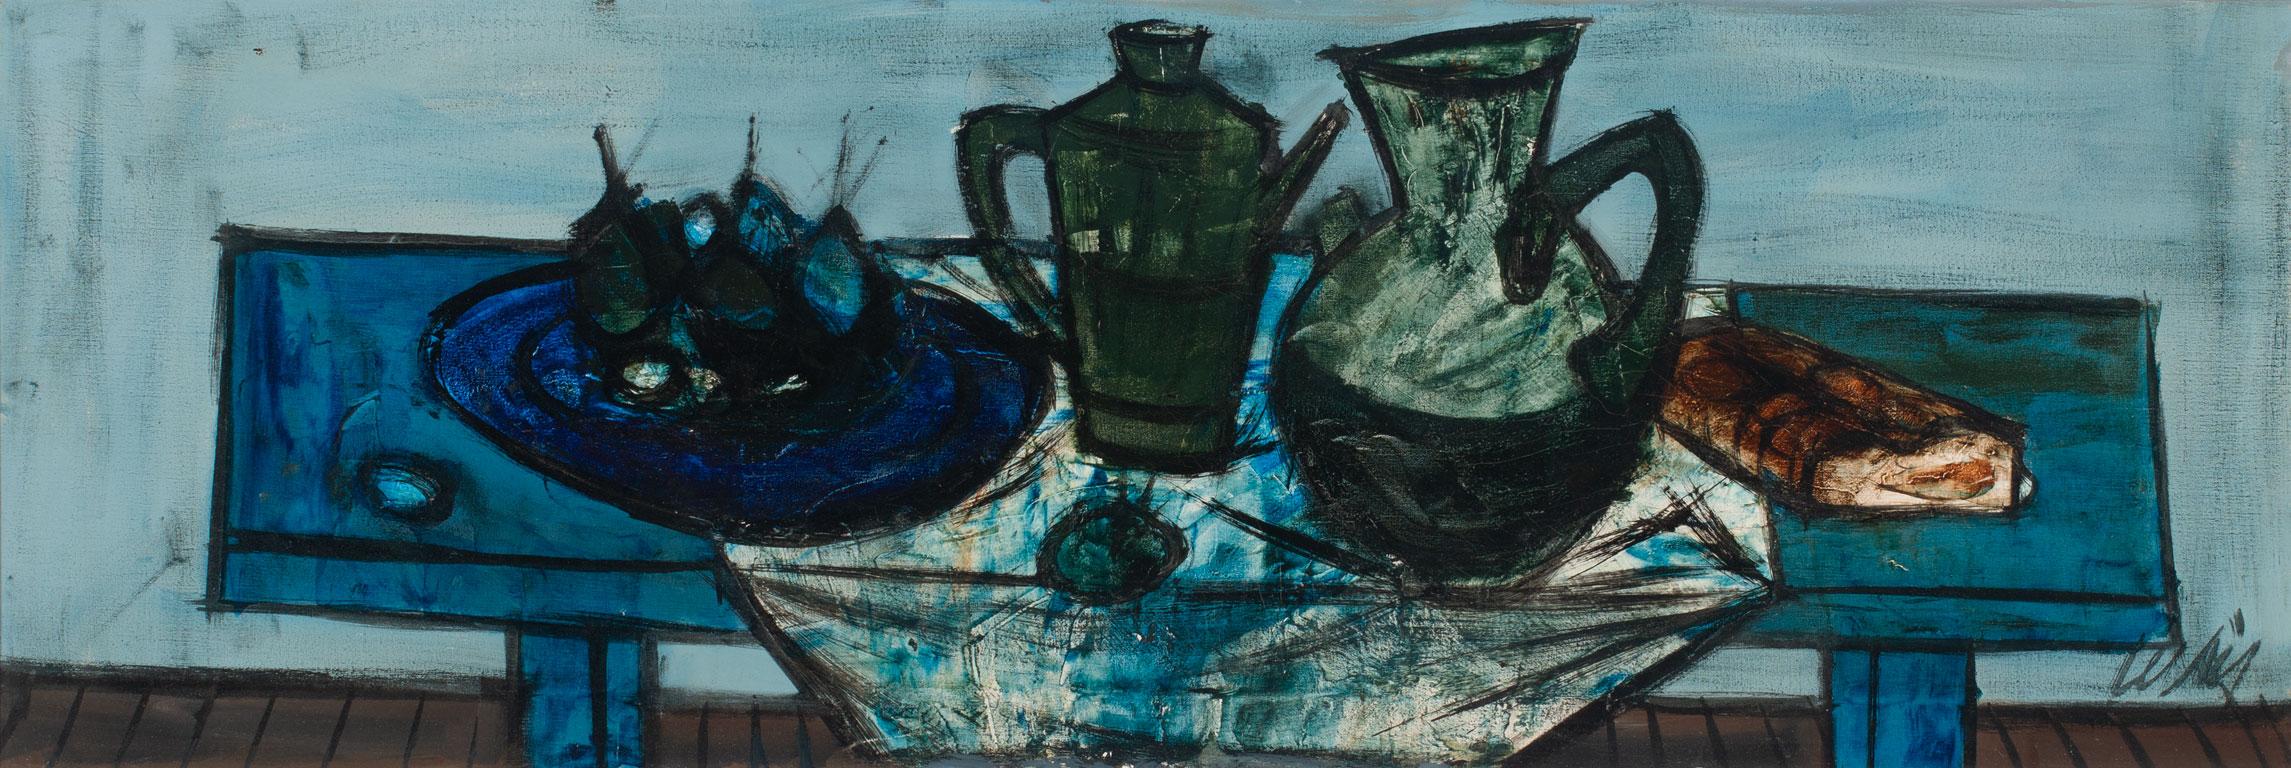 Untitled [Table Bleue], an original oil on canvas by Charles Levier, is a piece for the true collector. Levier's vivid detail projects from the painting, immediately capturing the viewer's attention, highlighting the artist's keen ability to capture